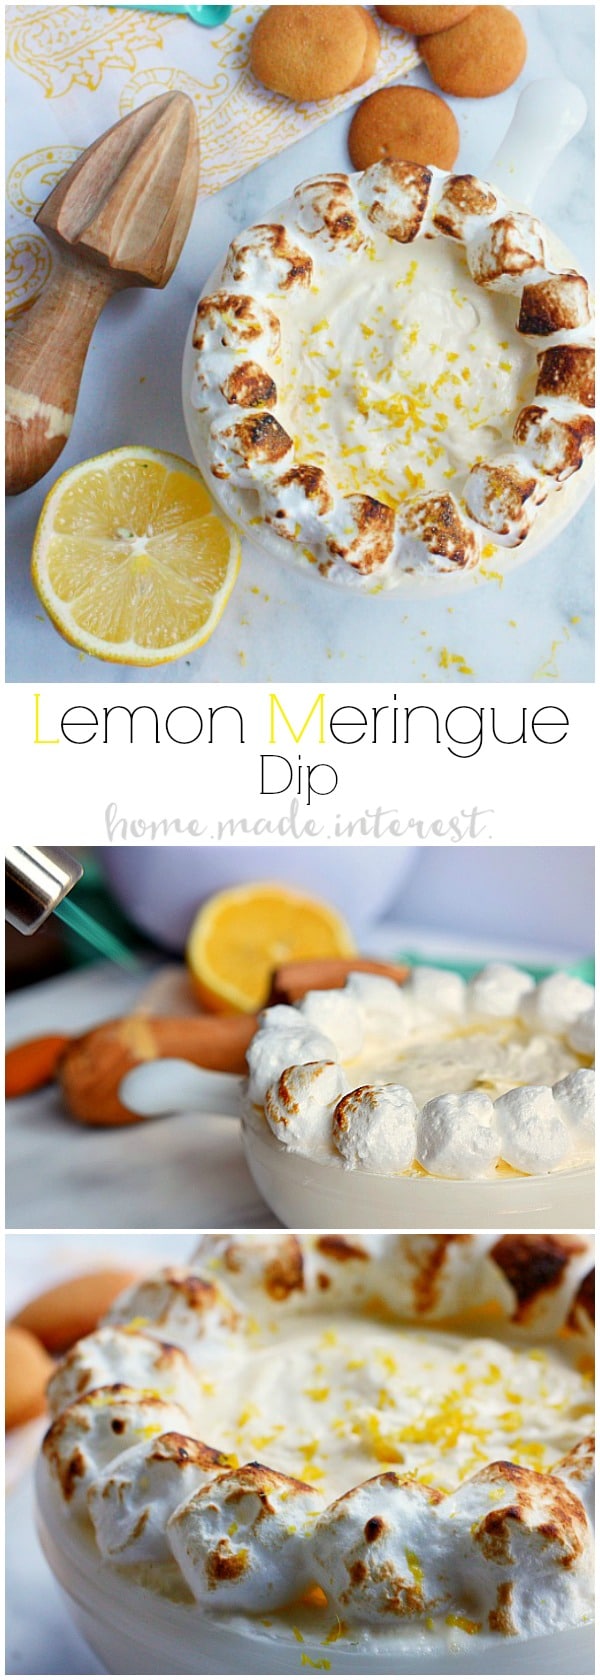 This fluffy Lemon Meringue Dip is a mix of meringue and lemon curd served with graham crackers or cookies. It is a no bake summer dessert that you can enjoy all year long! Take it to your next summer potluck or make it for your friends at your next party. 